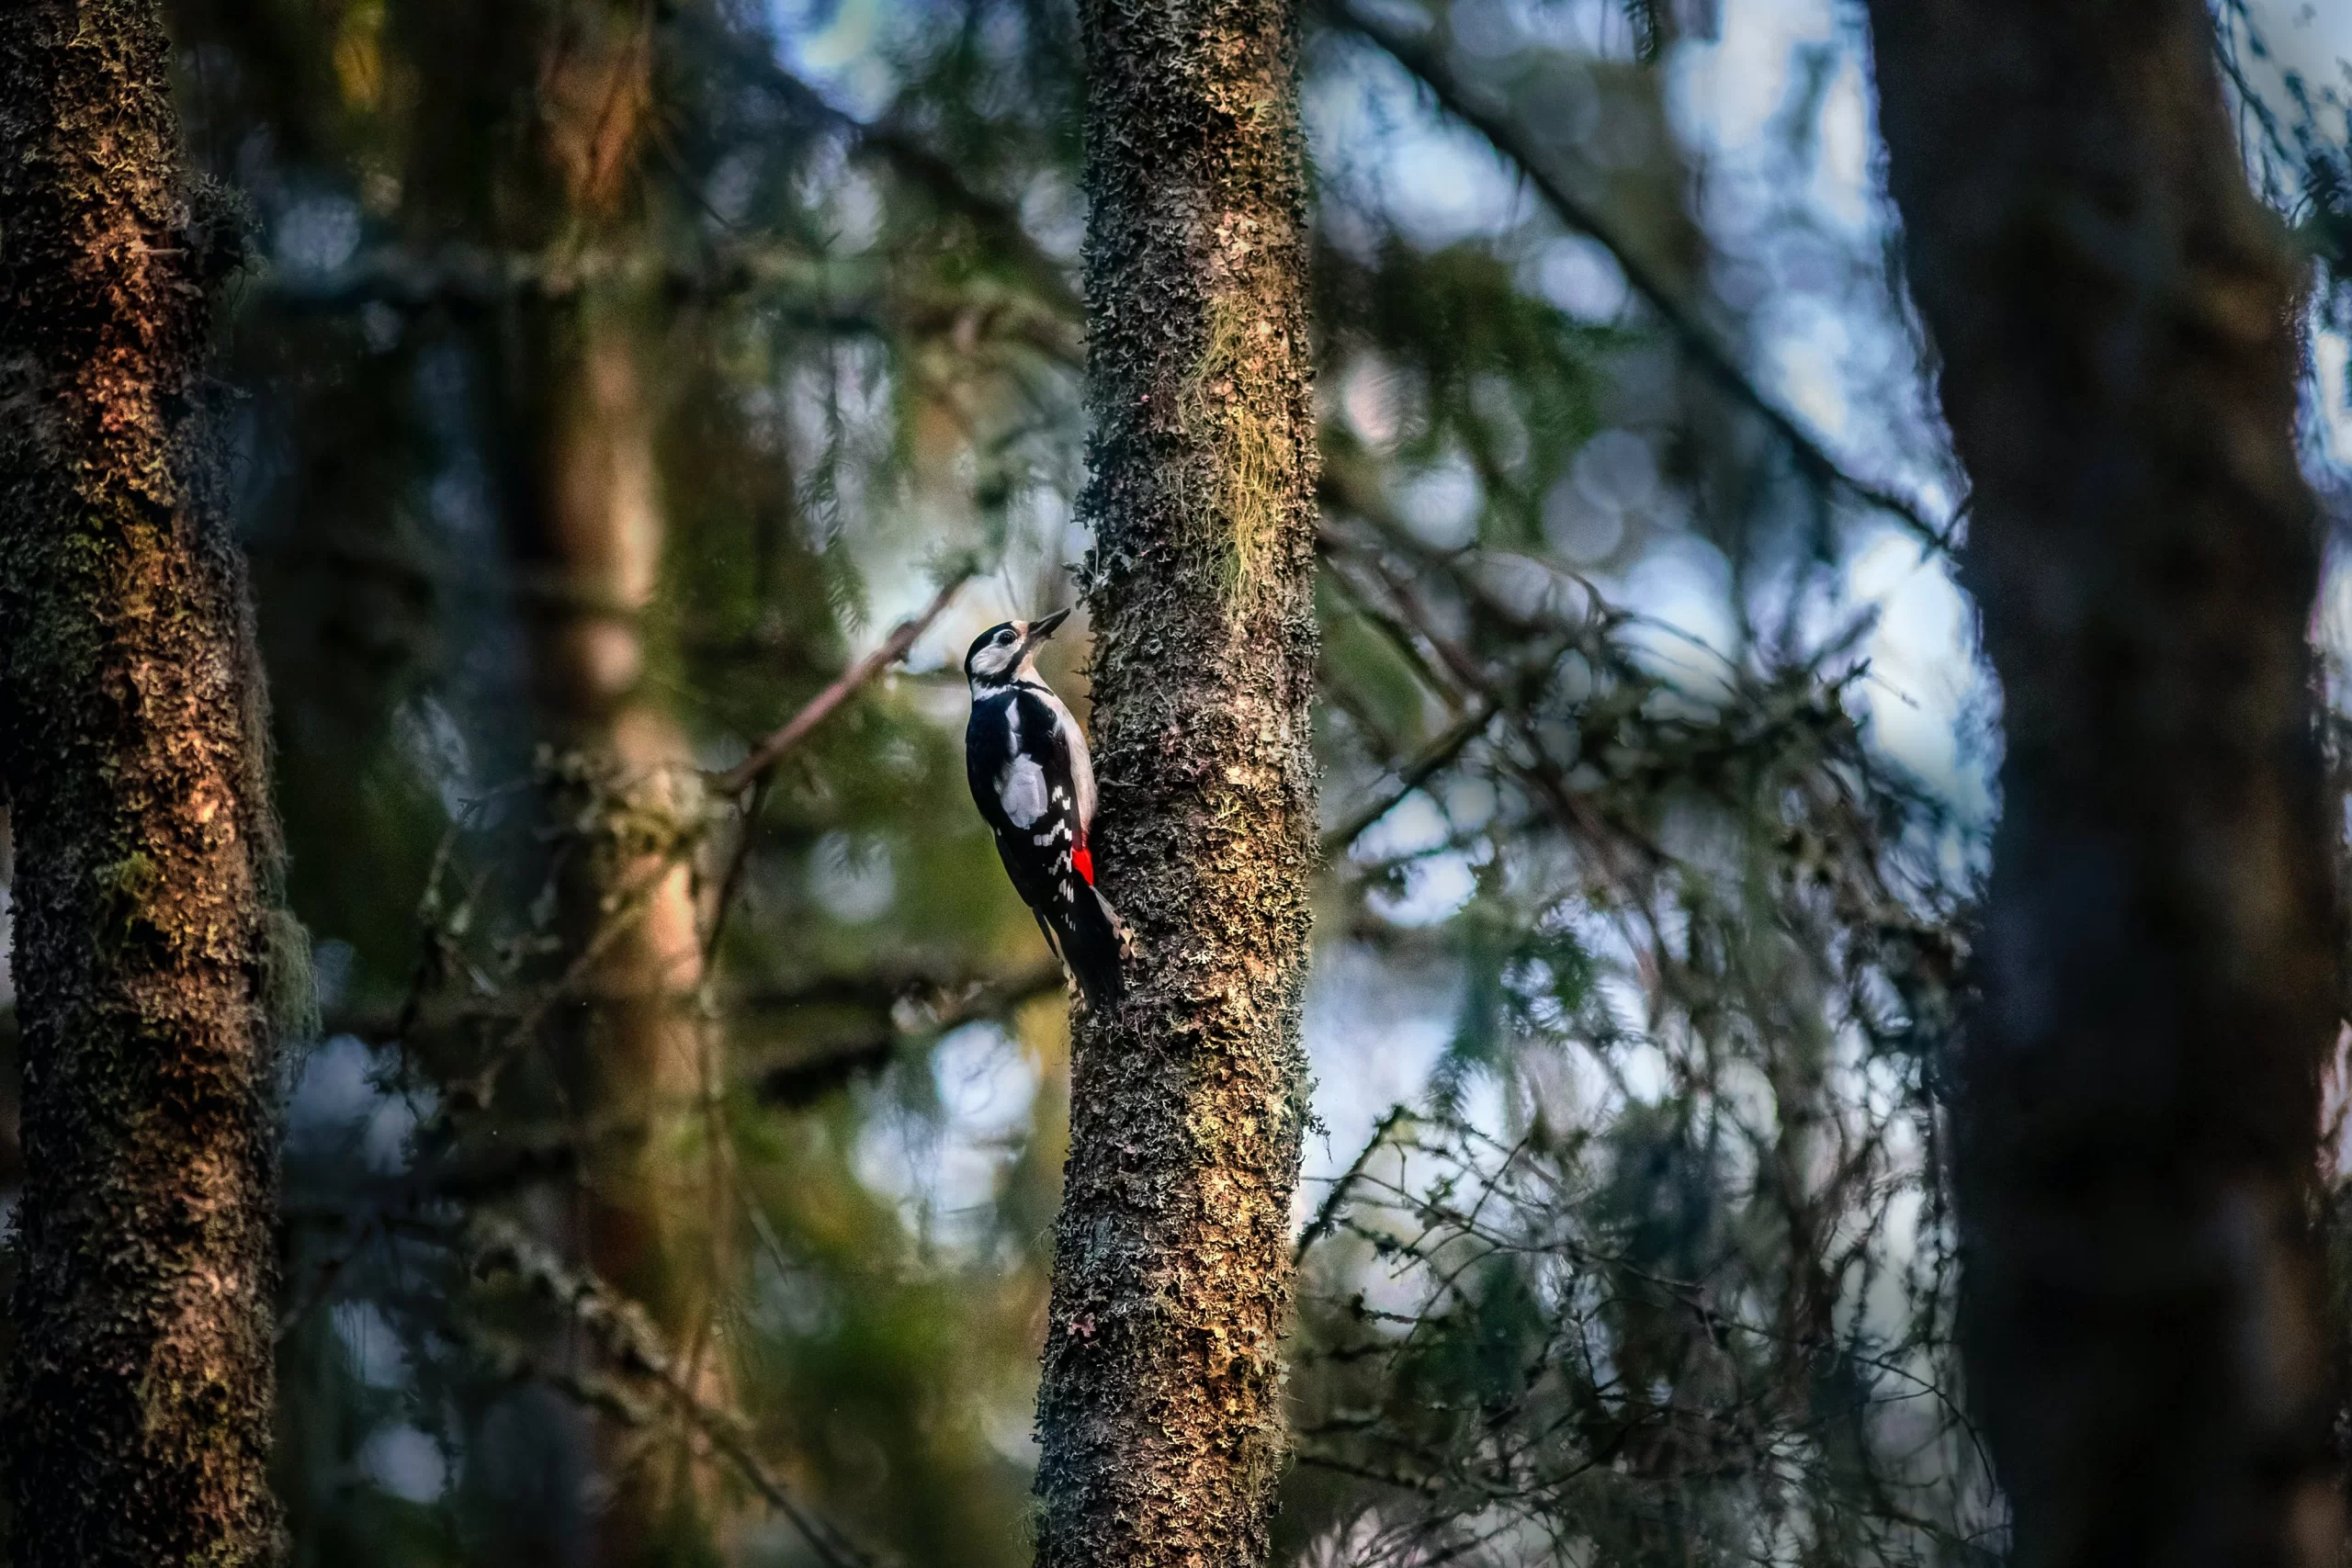 A Great Spotted Woodpecker creeps up a lichen-covered tree.